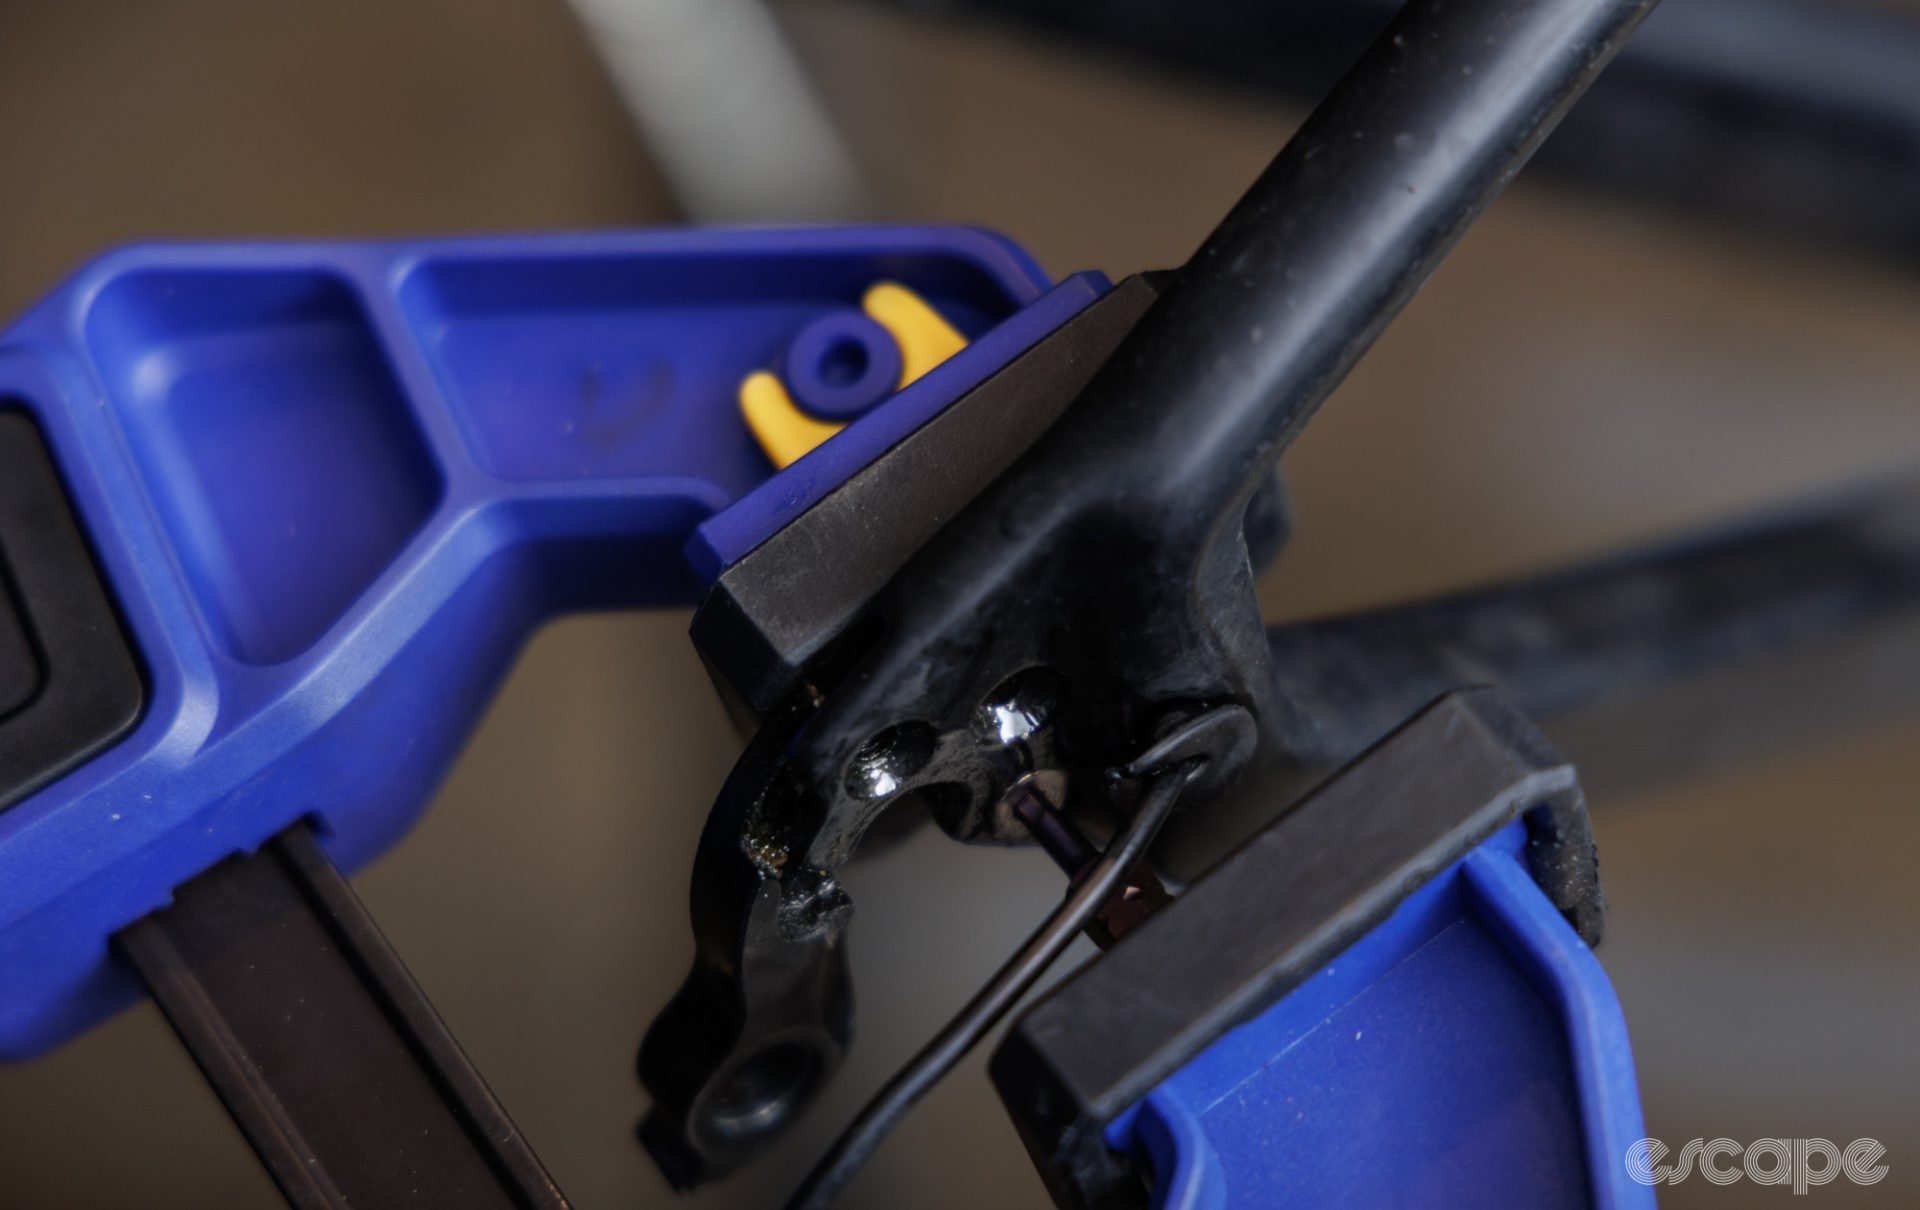 Irwin Quick-Grip Heavy Duty clamped being used to remove a rounded derailleur hanger bolt. 